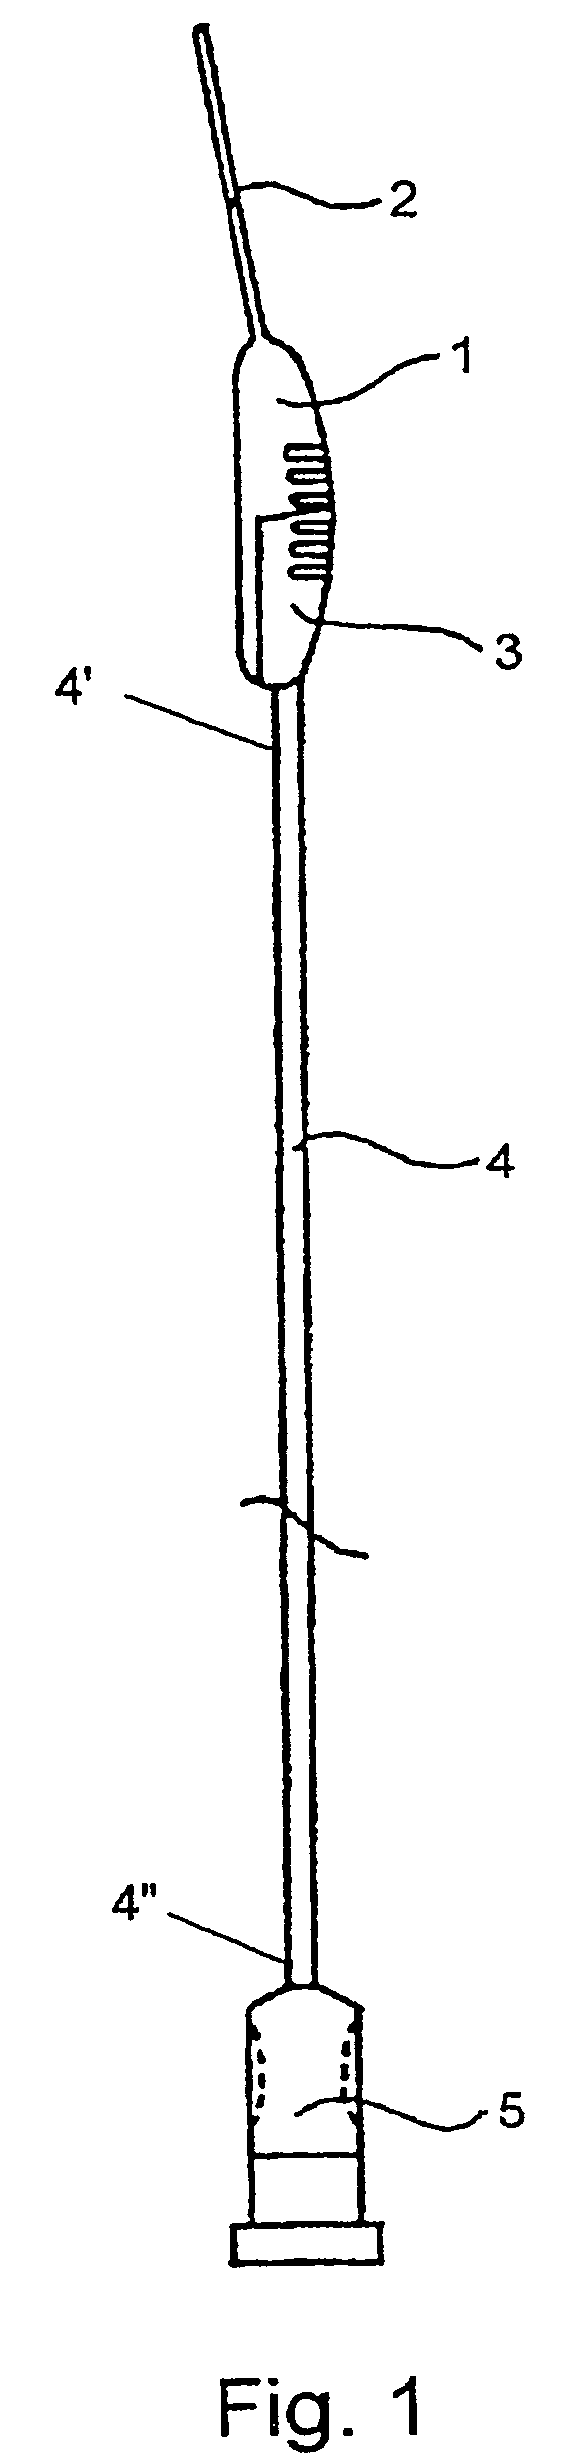 Device for subcutaneous administration of a medicament to a patient